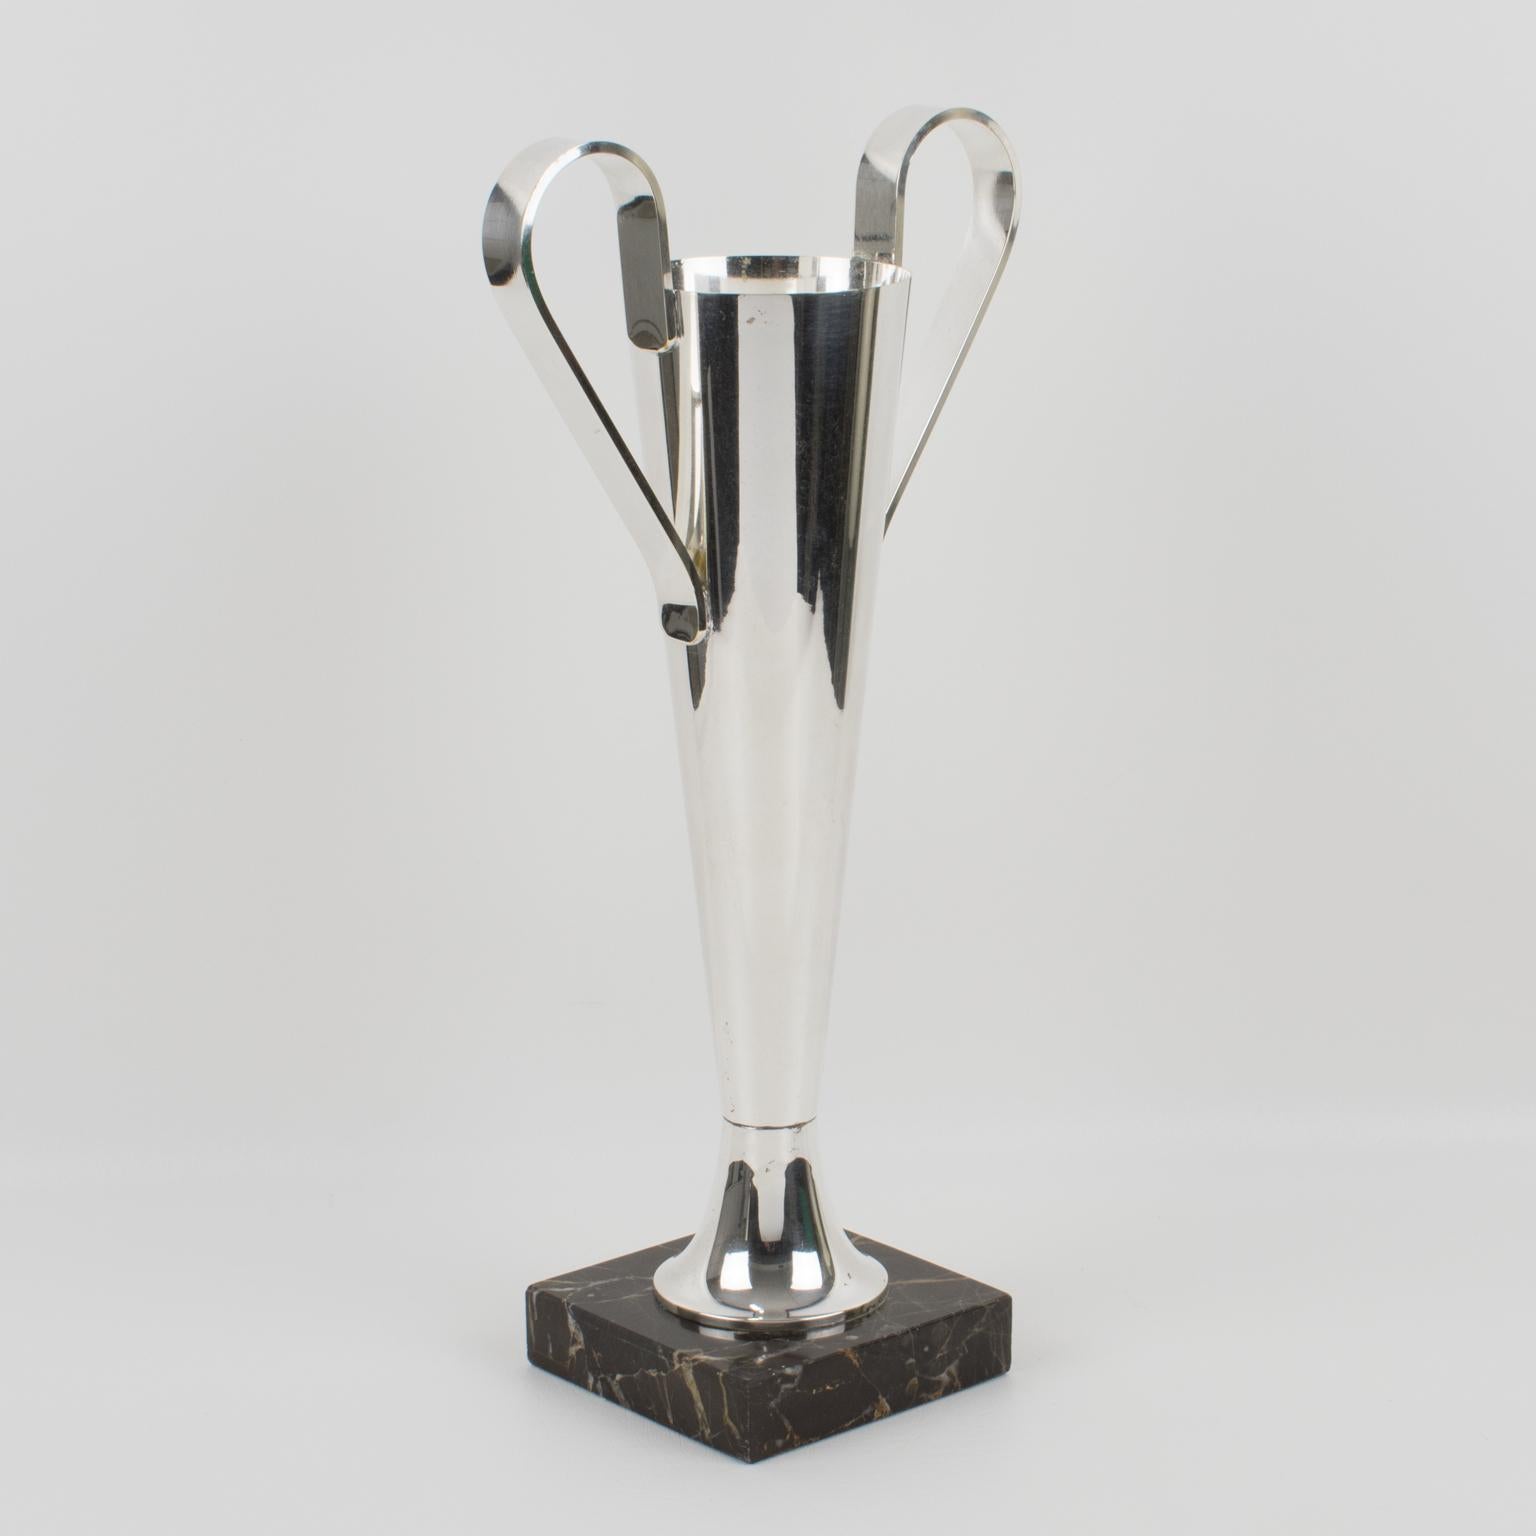 An elegant French Art Deco tall silver plate vase designed with wide handles on a marble base. This vase could be a trophy. This vessel has a streamlined tulip shape ornate with sturdy handles and stands on a square black Portor marble base. There